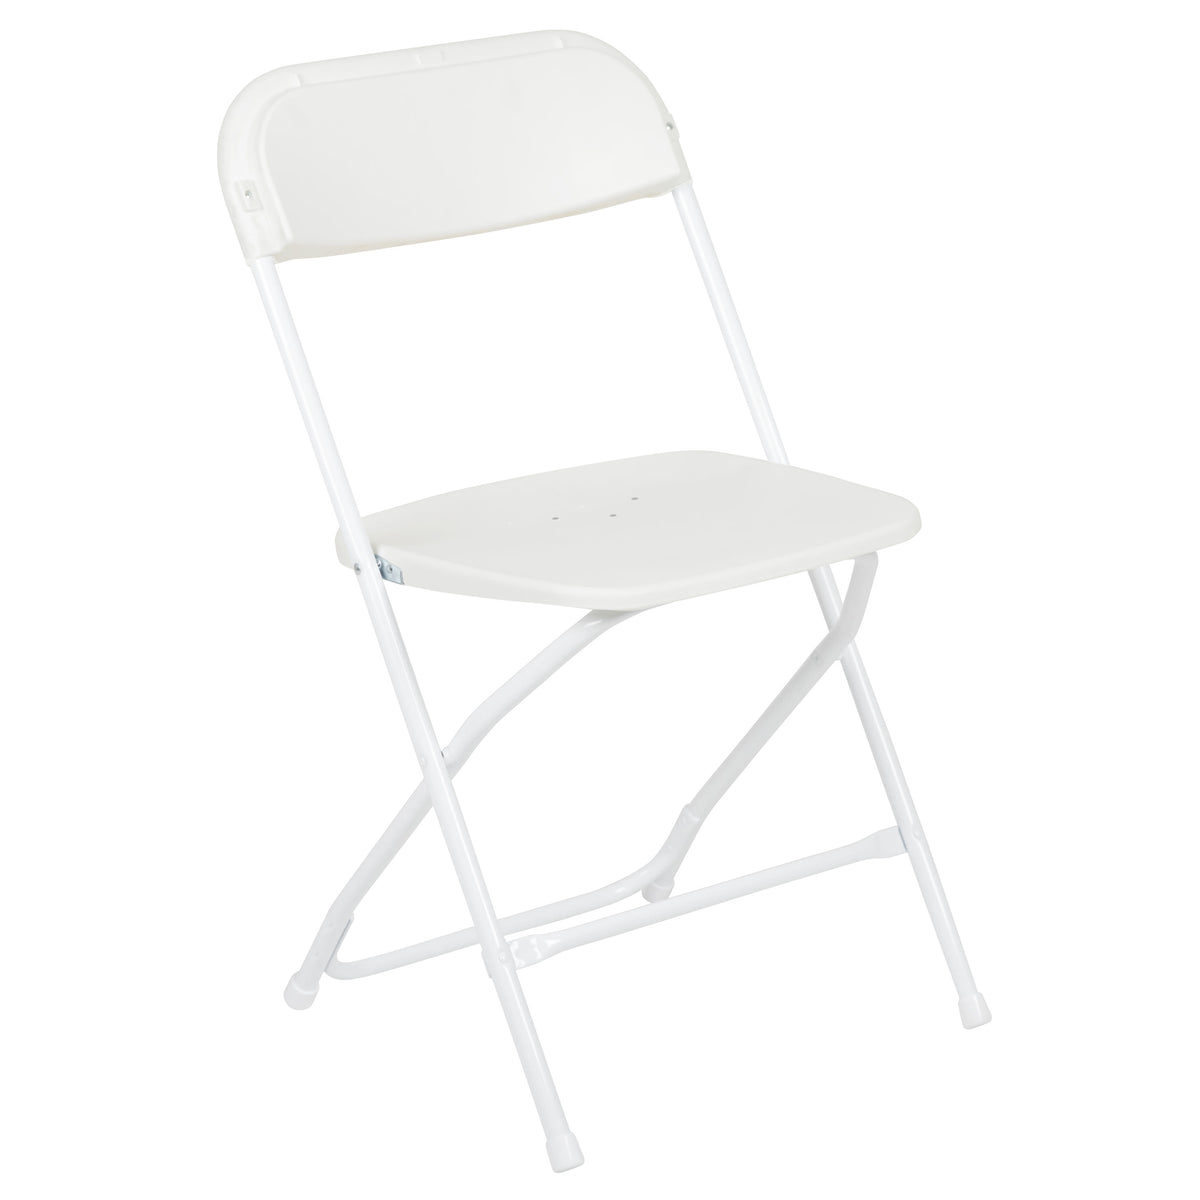 White |#| 10' x 10' White Pop Up Canopy, Folding Table and 4 White Folding Chairs Bundle